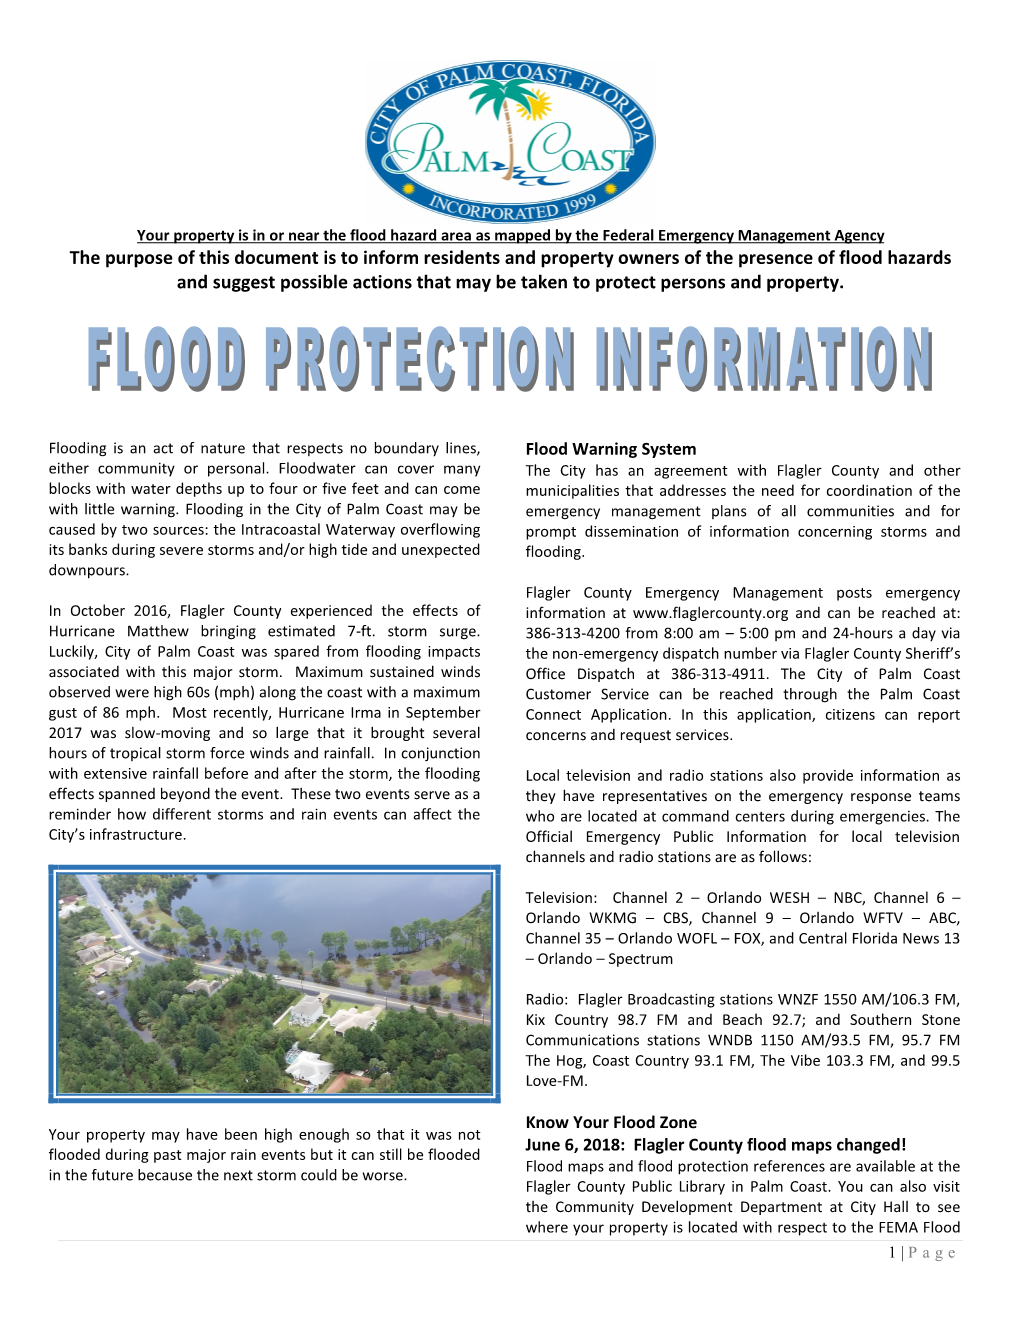 Flood Protection Information